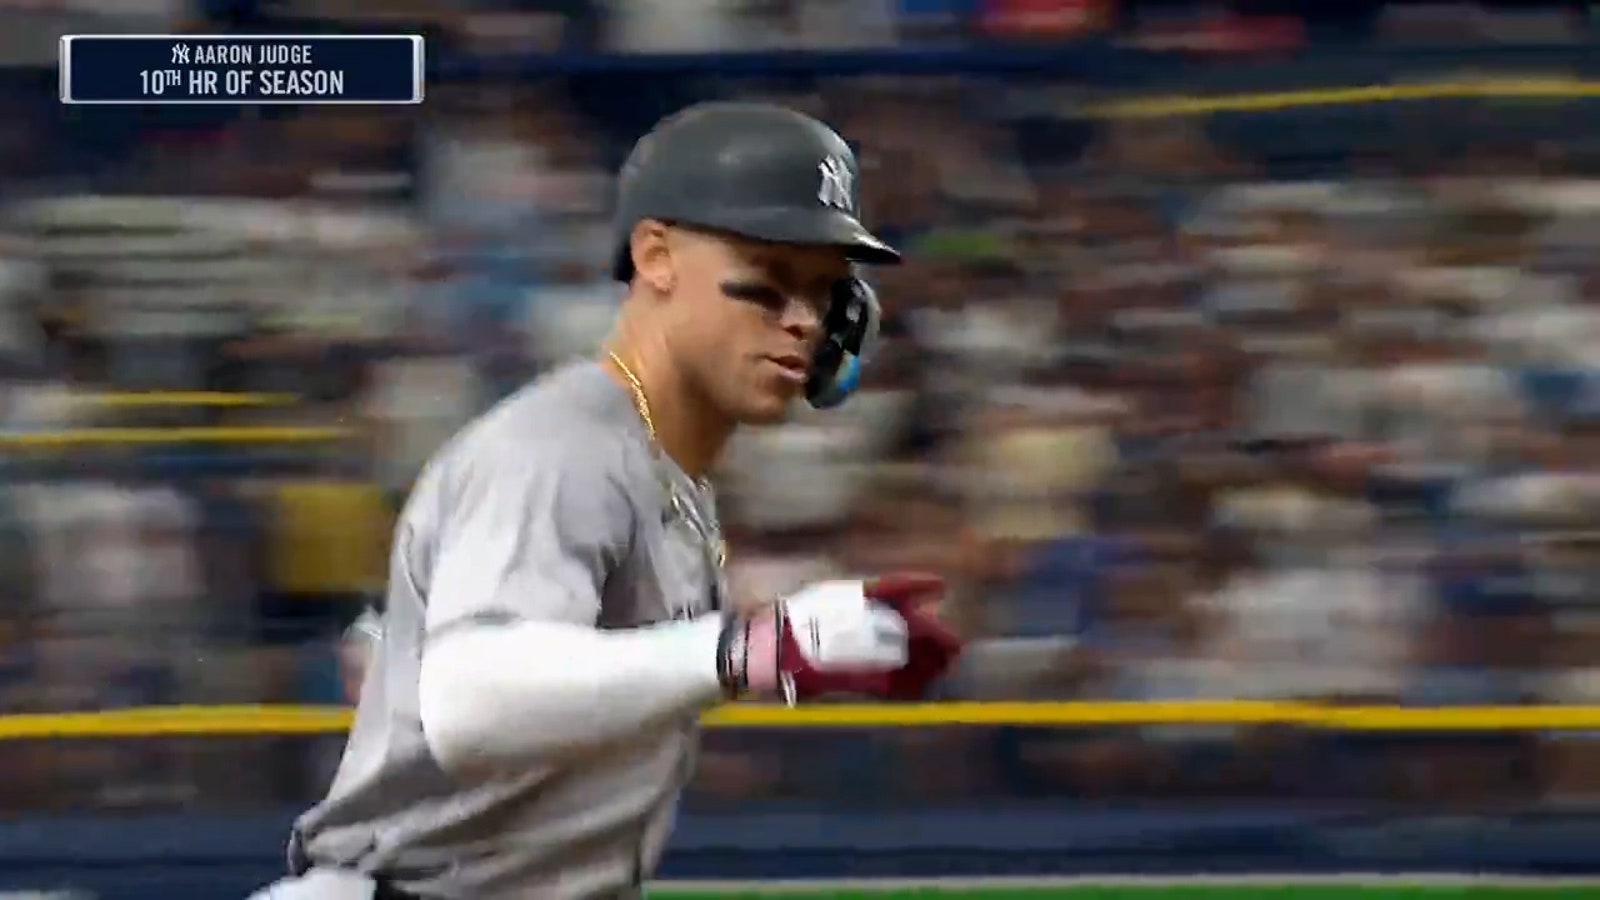 Yankees' Aaron Judges blasts a two-run HR, extending lead over Rays